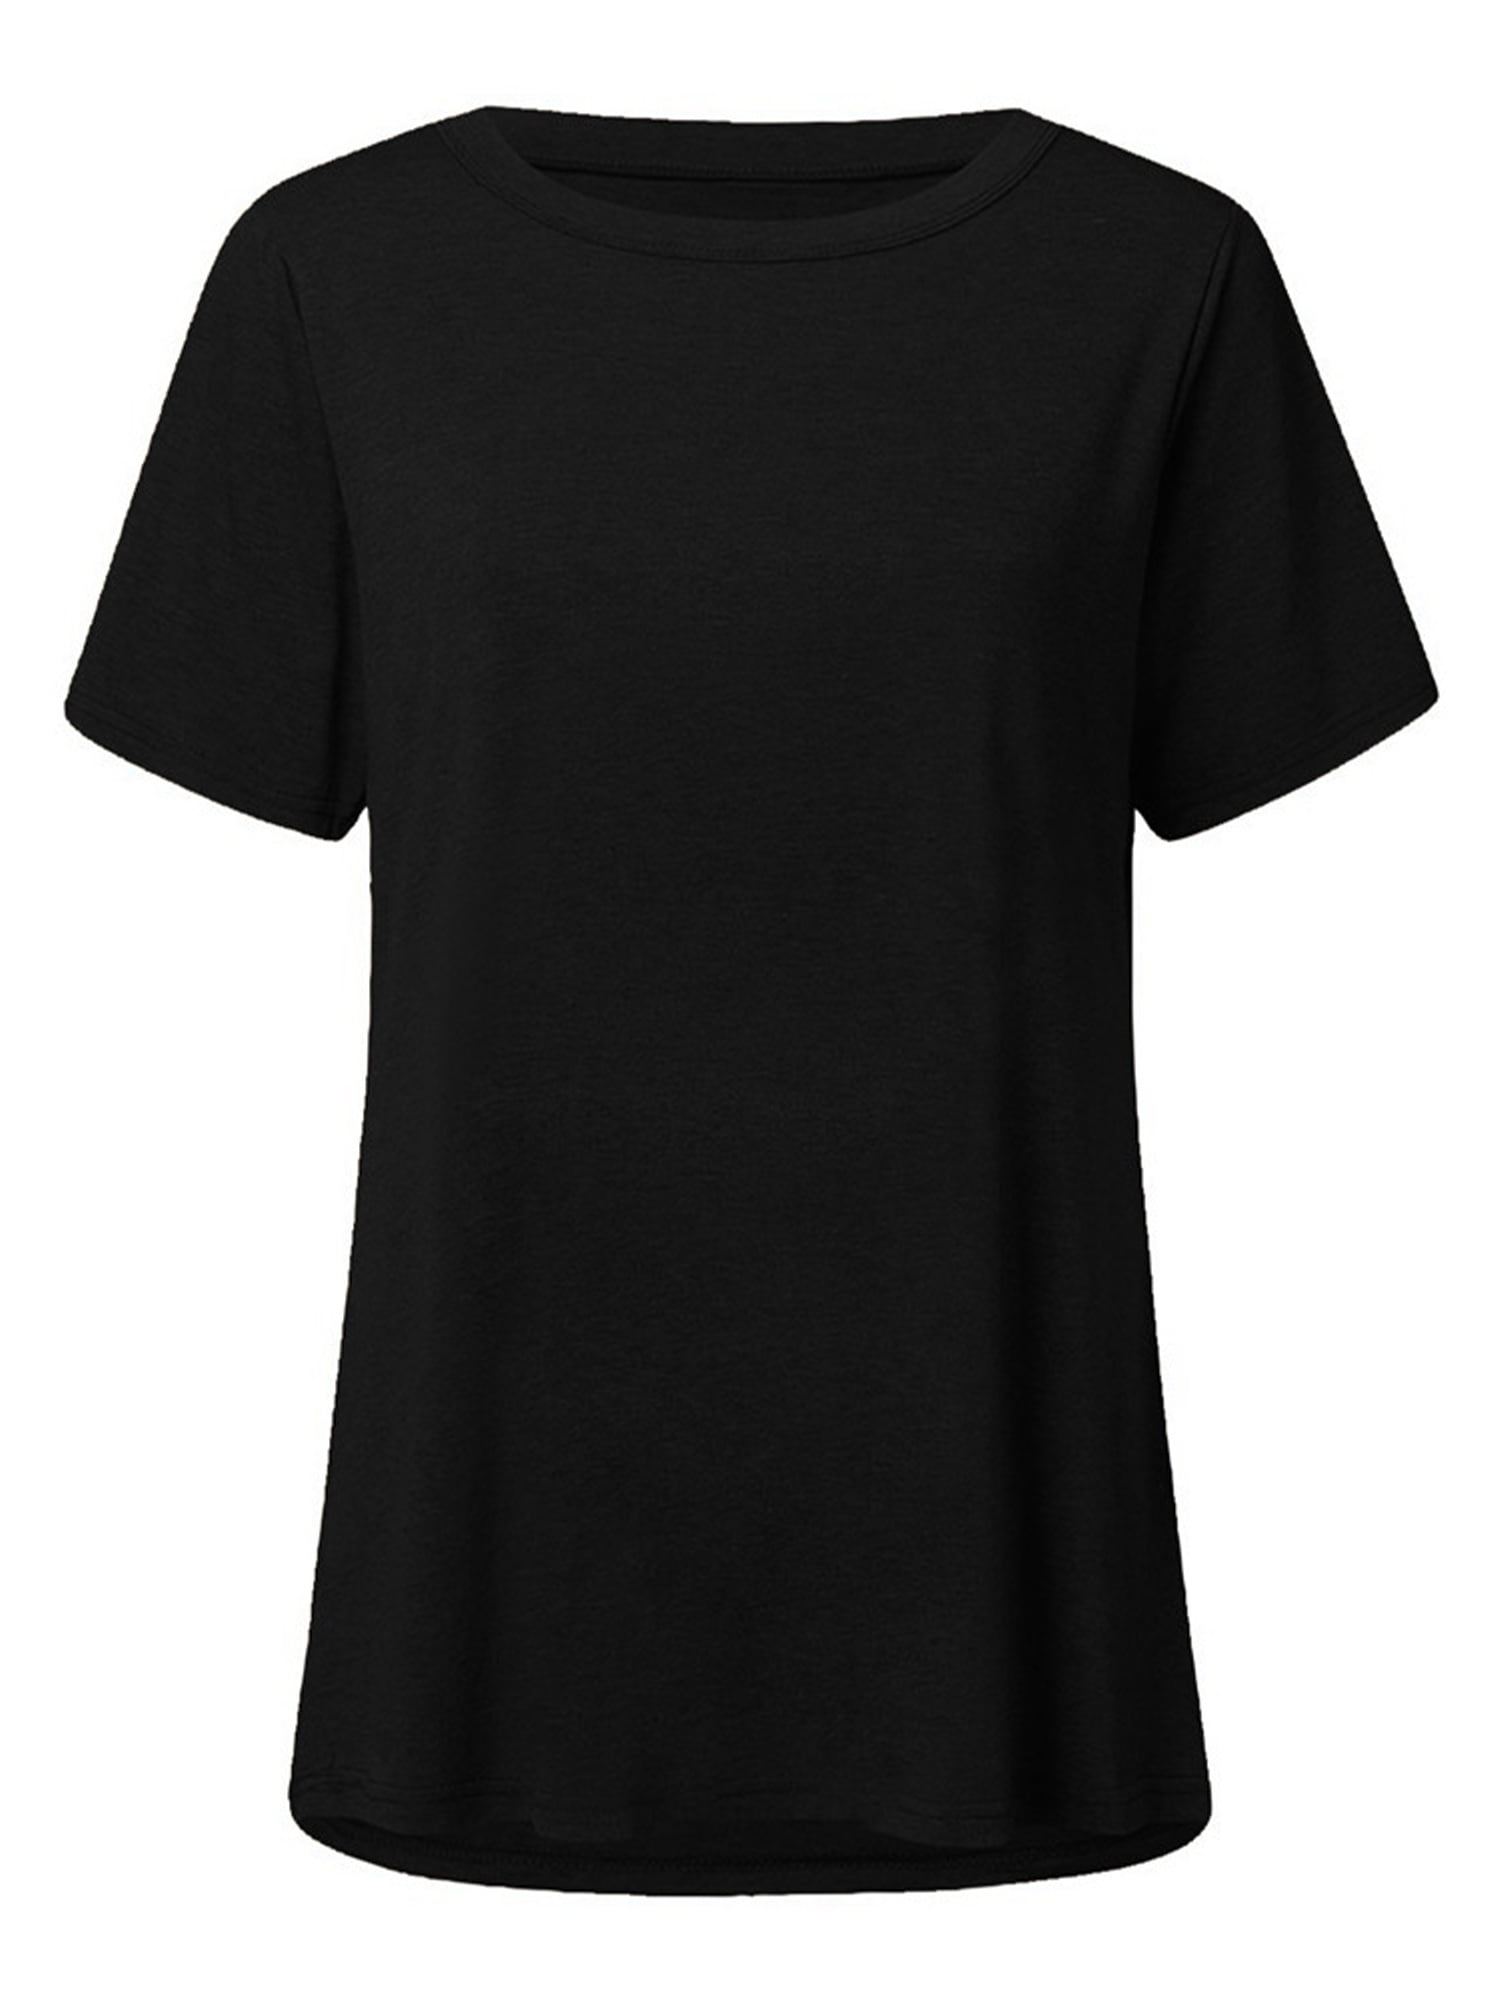 Aiouios Womens Summer Short Sleeve Tops Plus Size Casual V Neck T Shirts Pullover Comfy Solid Tunic Tops and Blouses 